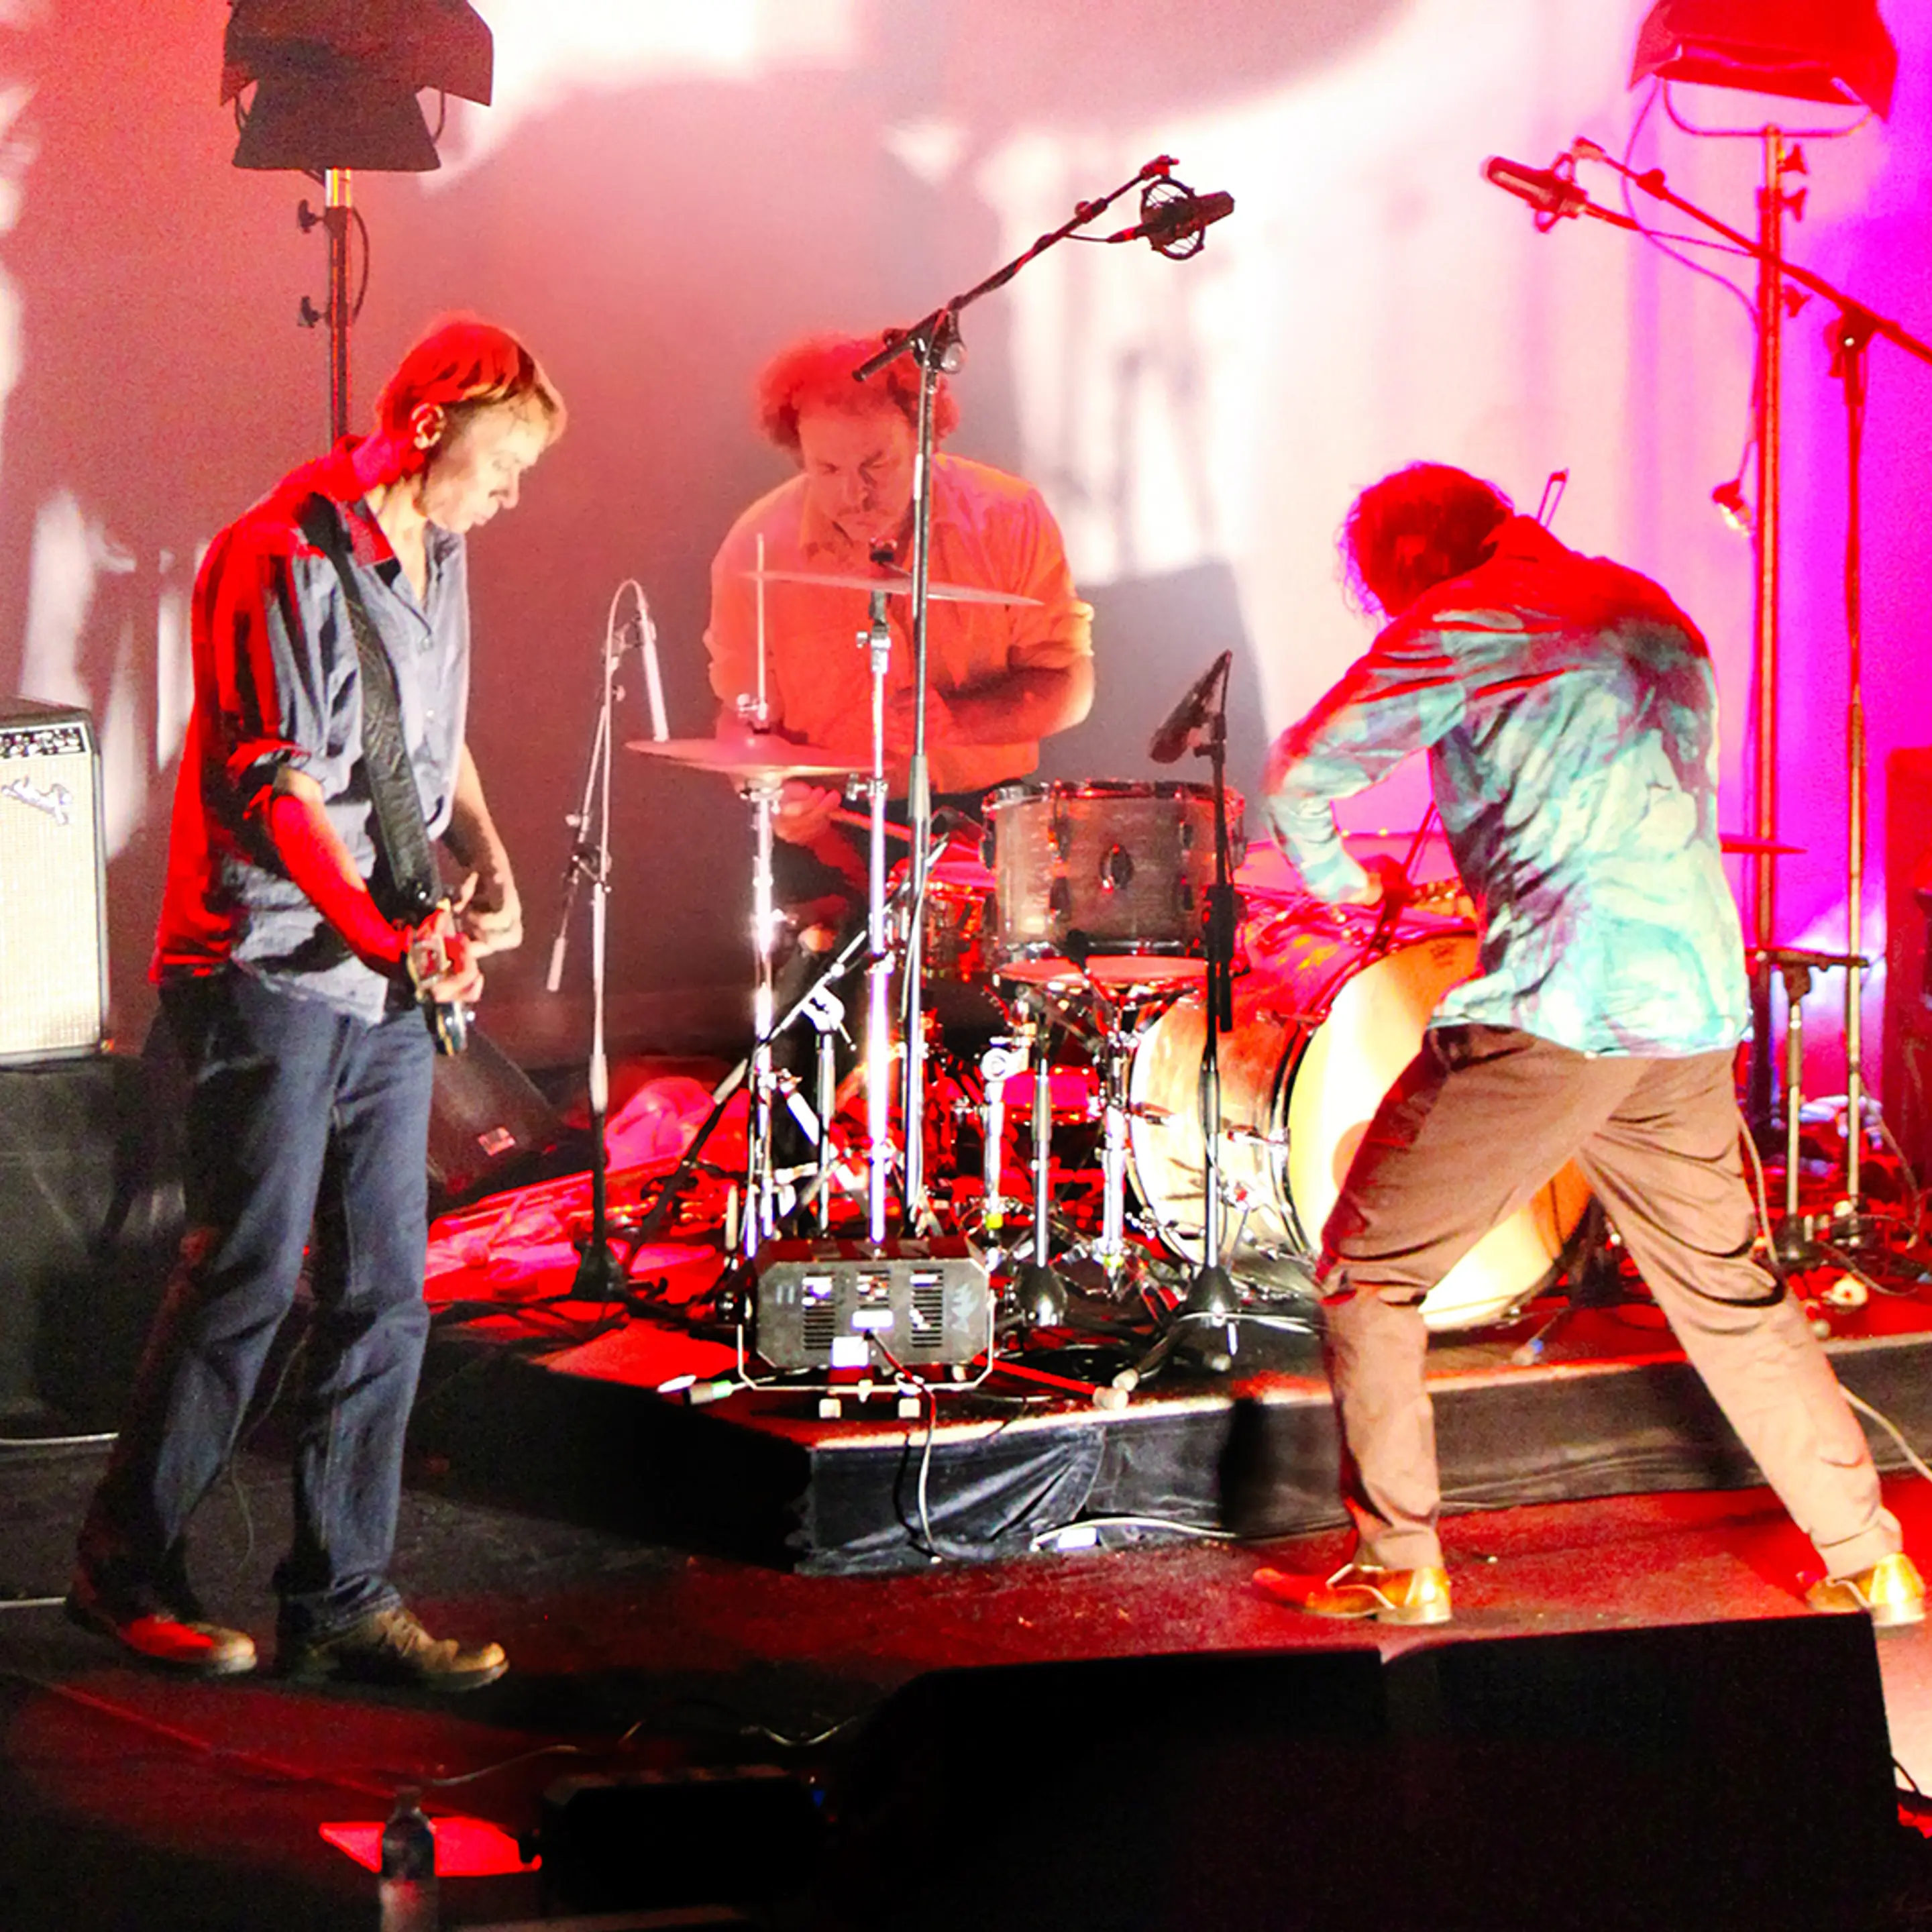 Three members of Dirty Three face each other on a stage, jamming together.